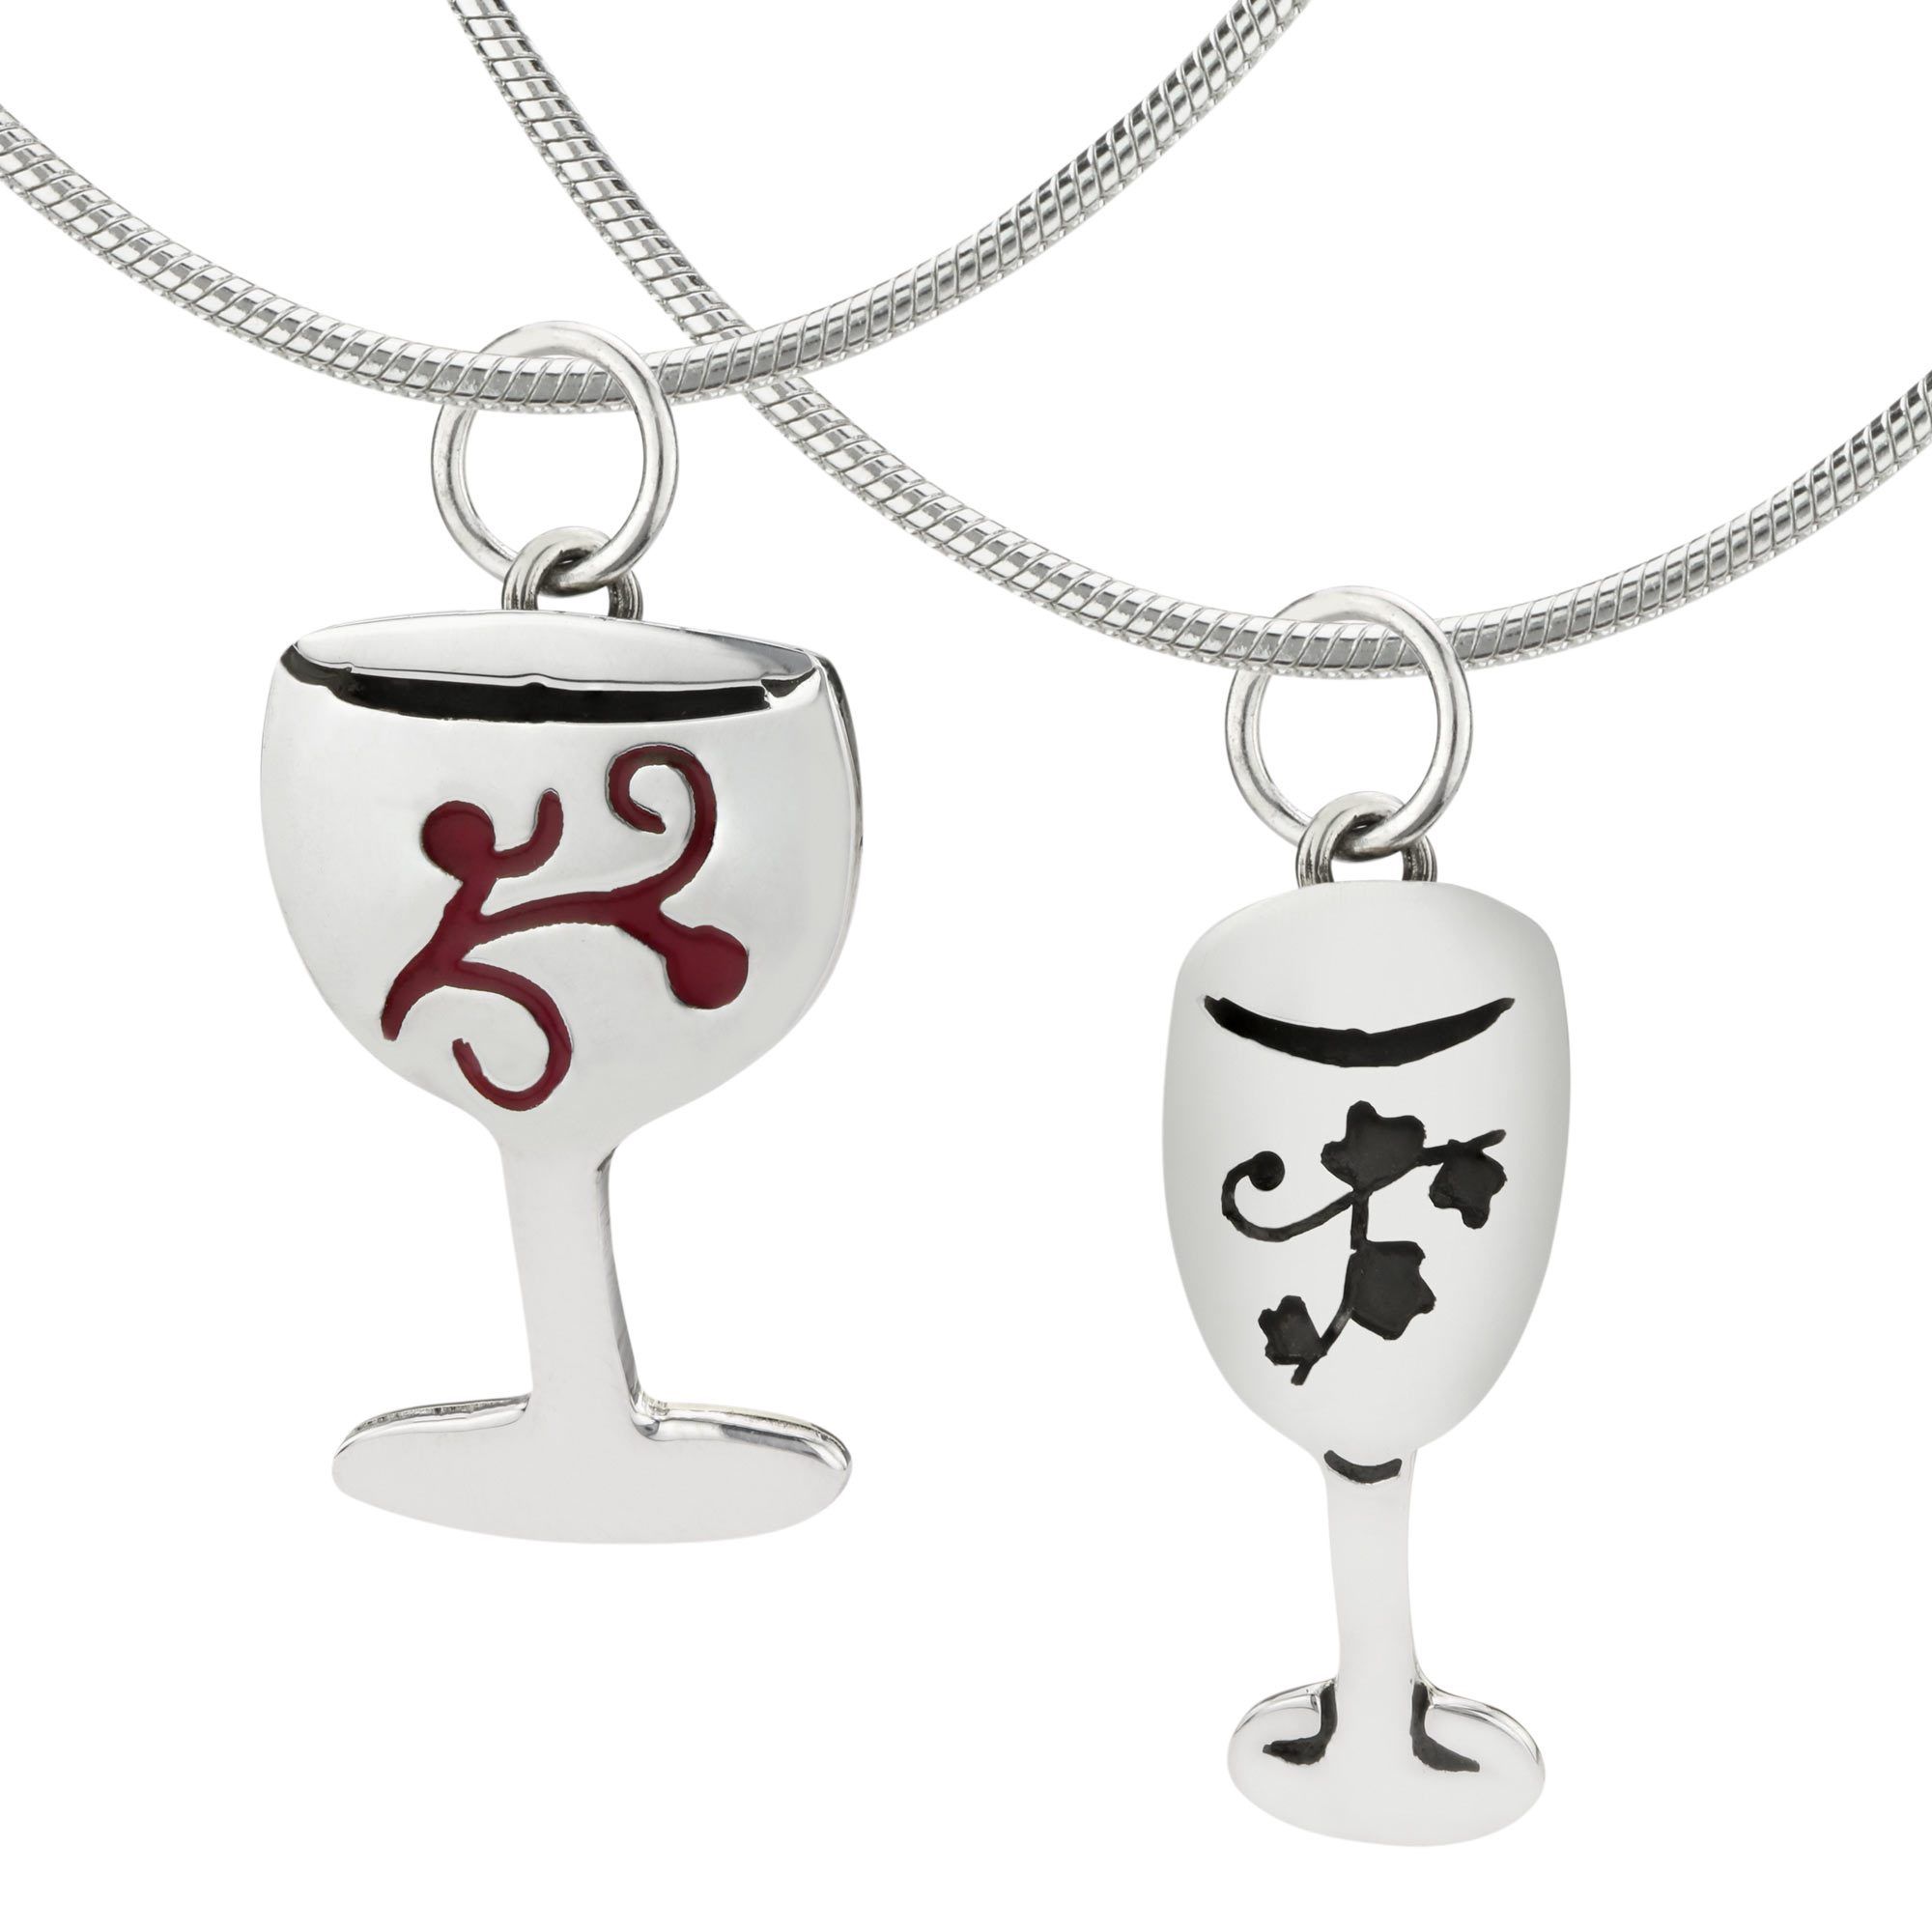 Wine Glass Sterling Necklace - Black - With Diamond Cut Chain